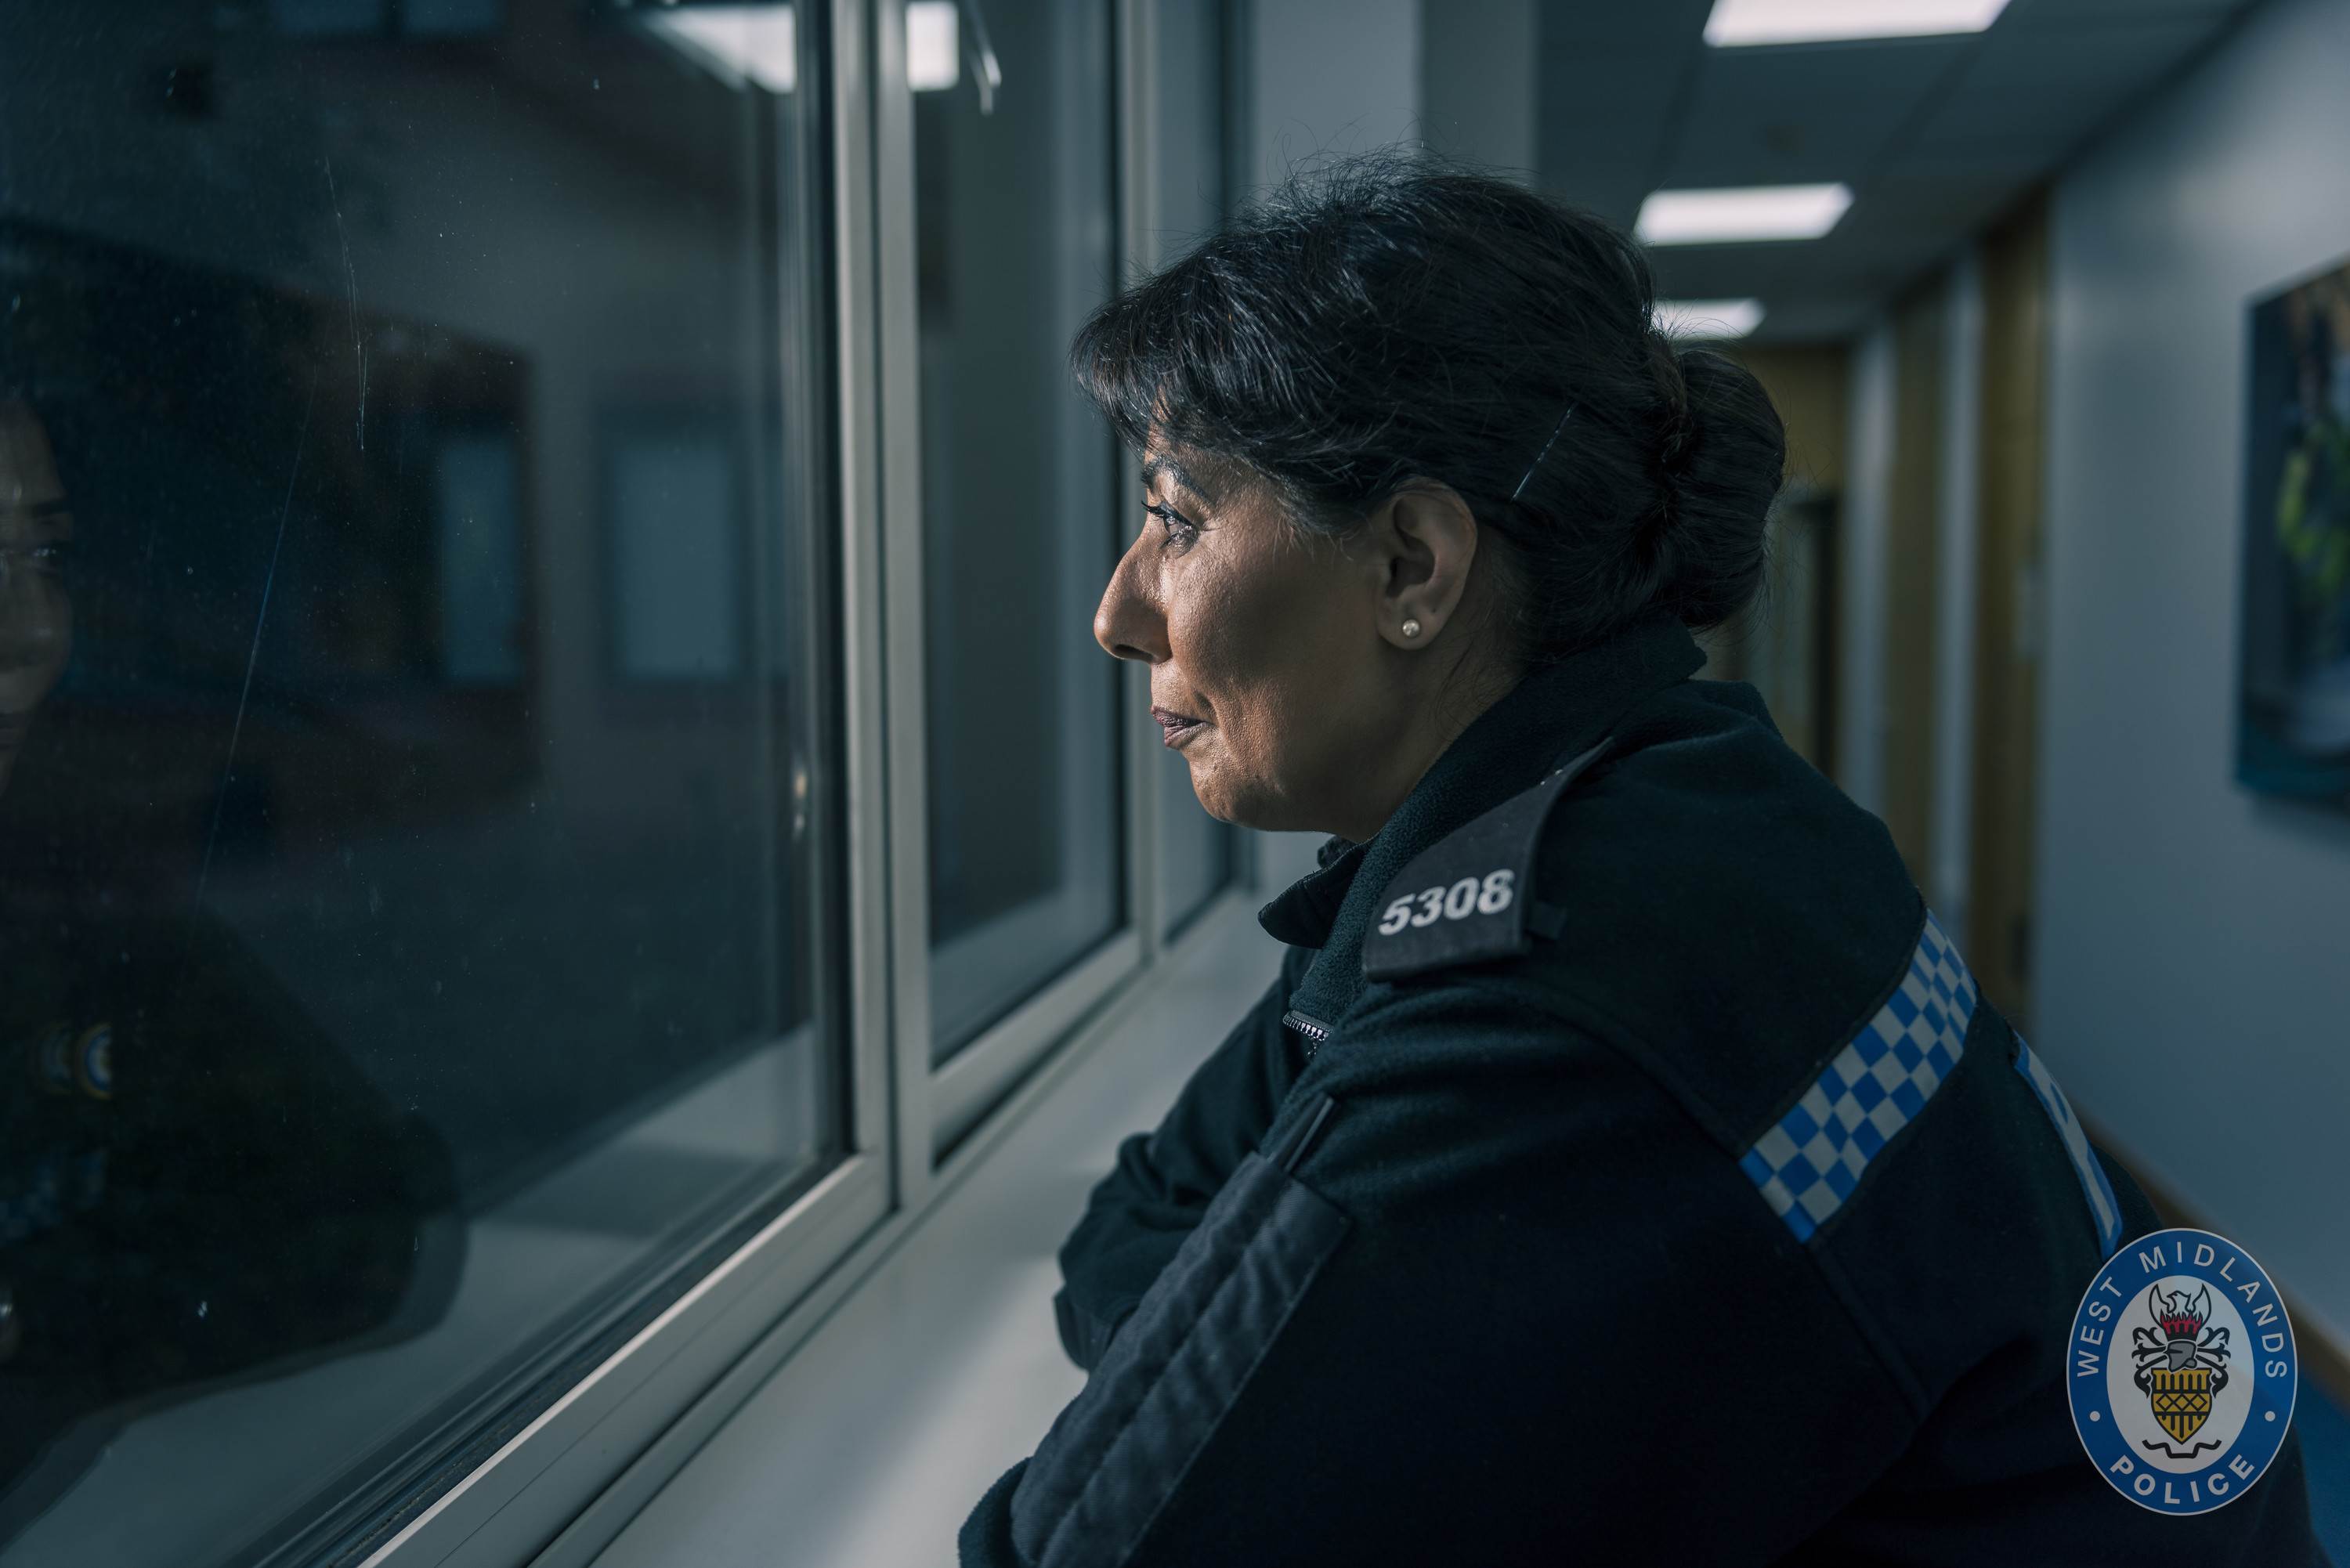 West Midlands Police officer looking through window